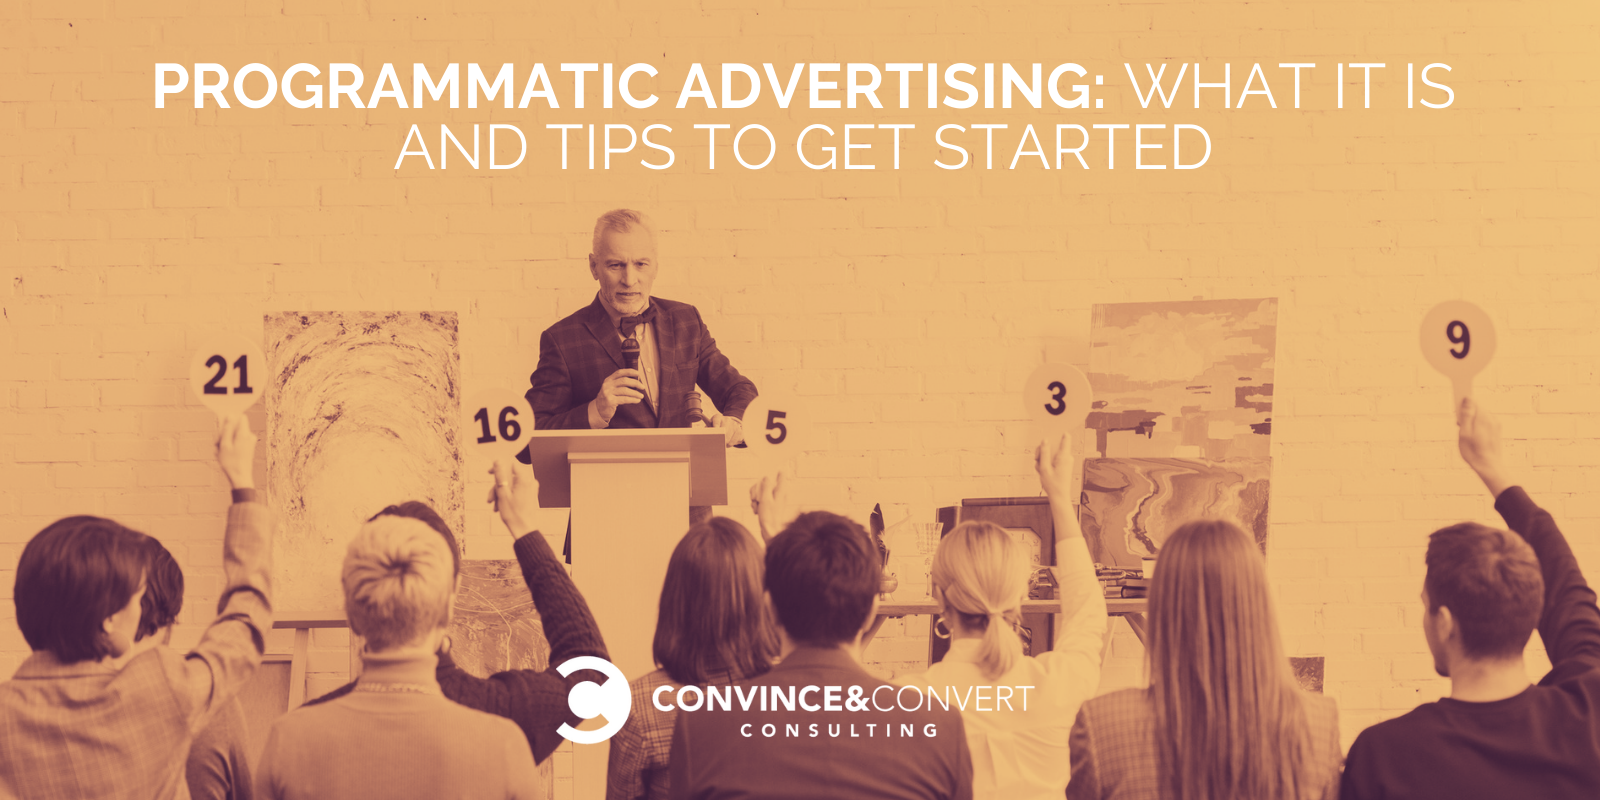 What is programmatic advertising?